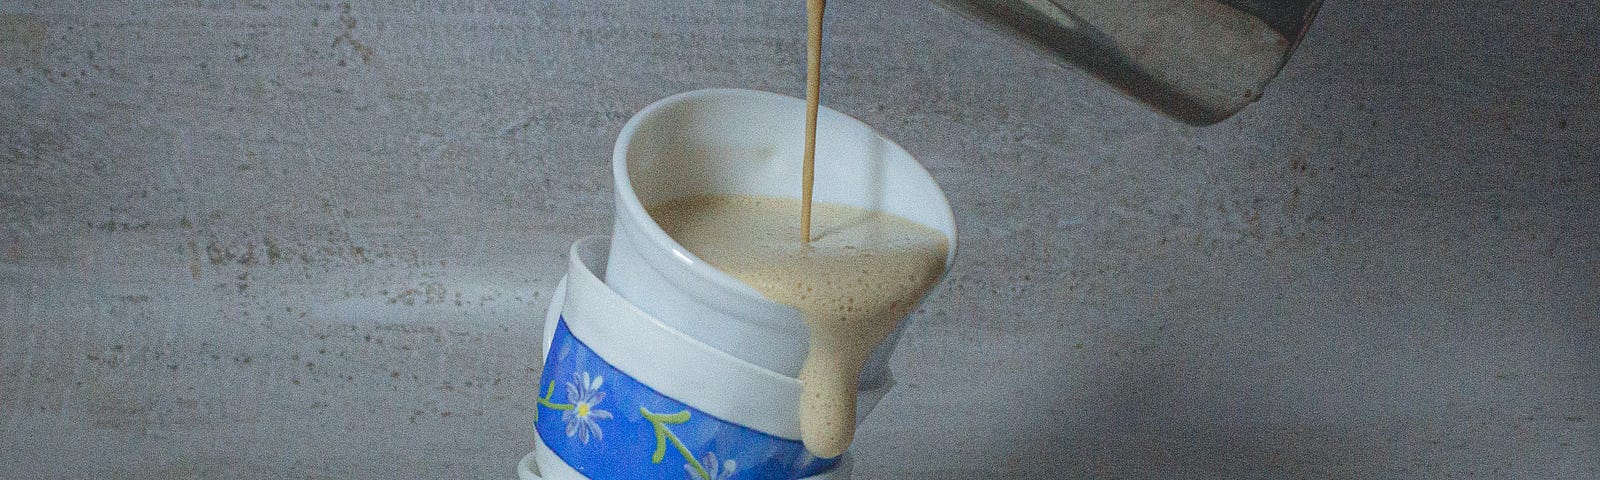 a metal pitcher spilling a drink into a coffee-cup tower